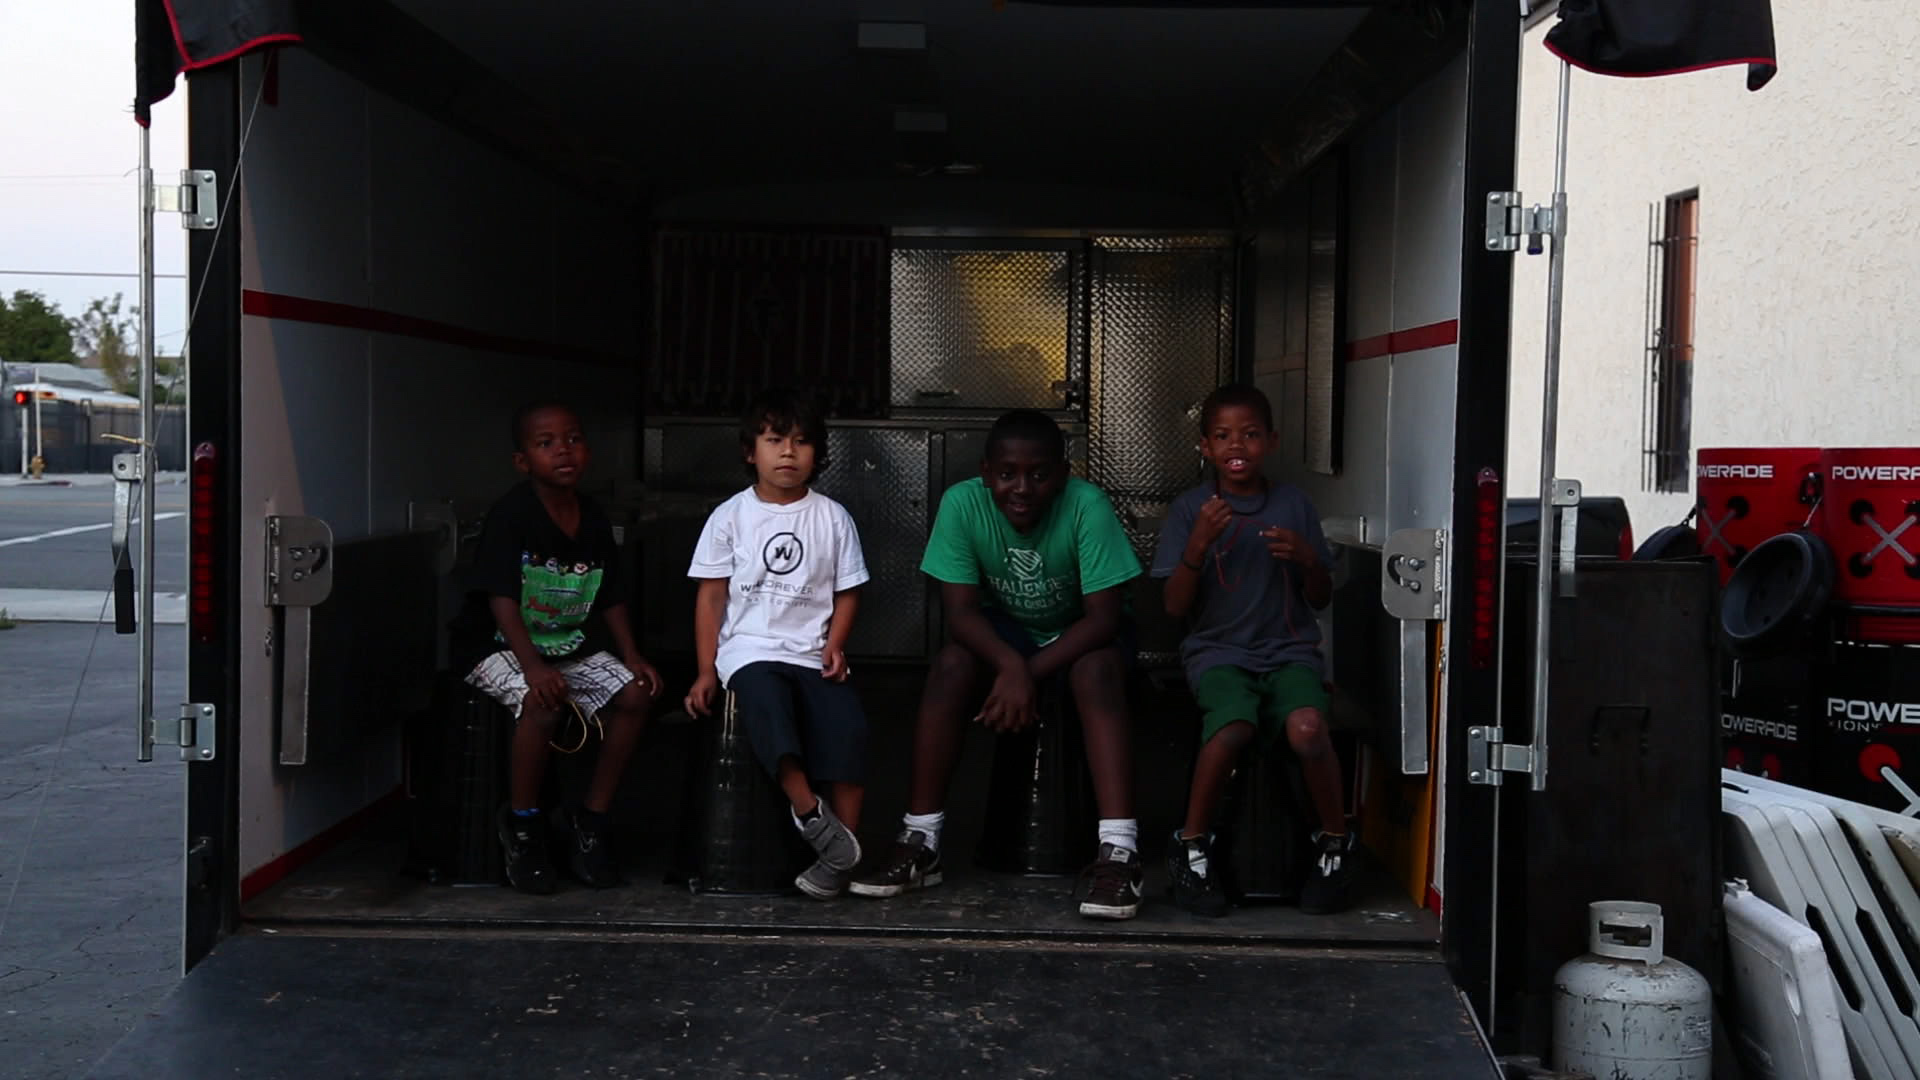  Southern California Falcons Youth Football Program - Mobile Homework Trailer - "Athletics after academics" 